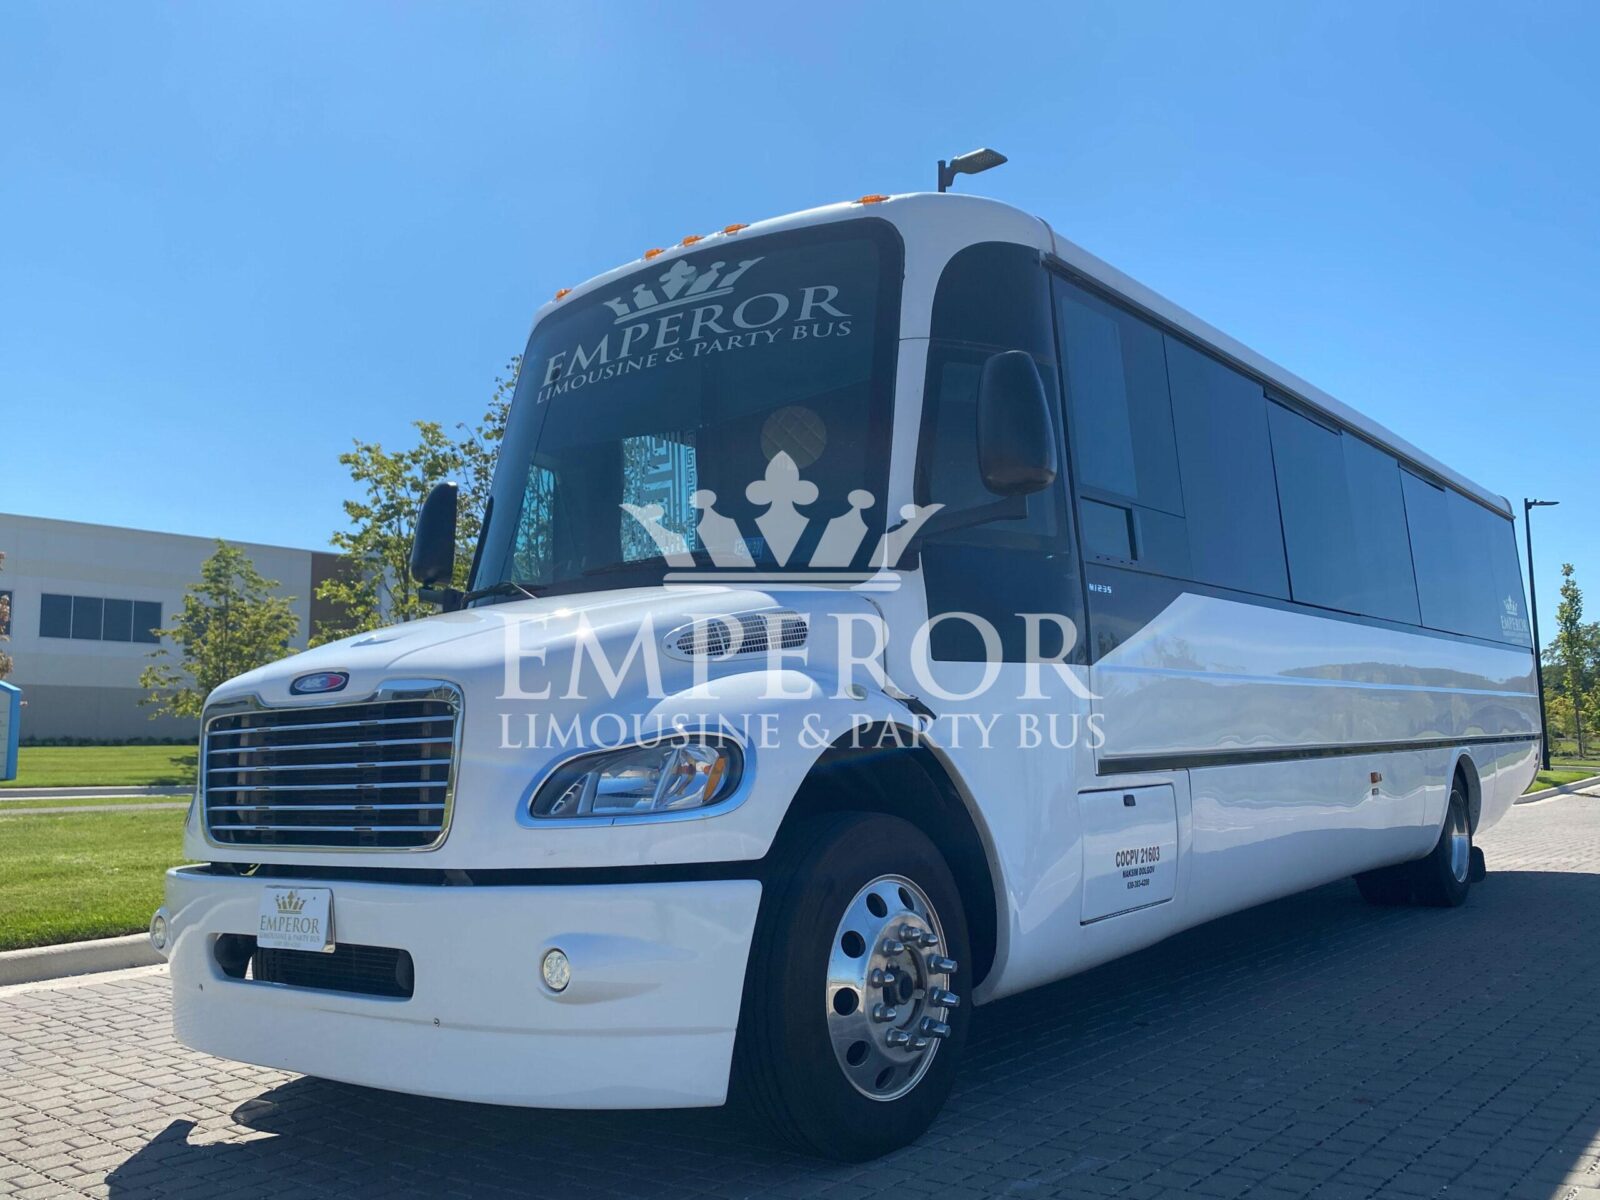 Party bus rental service in Bolingbrook